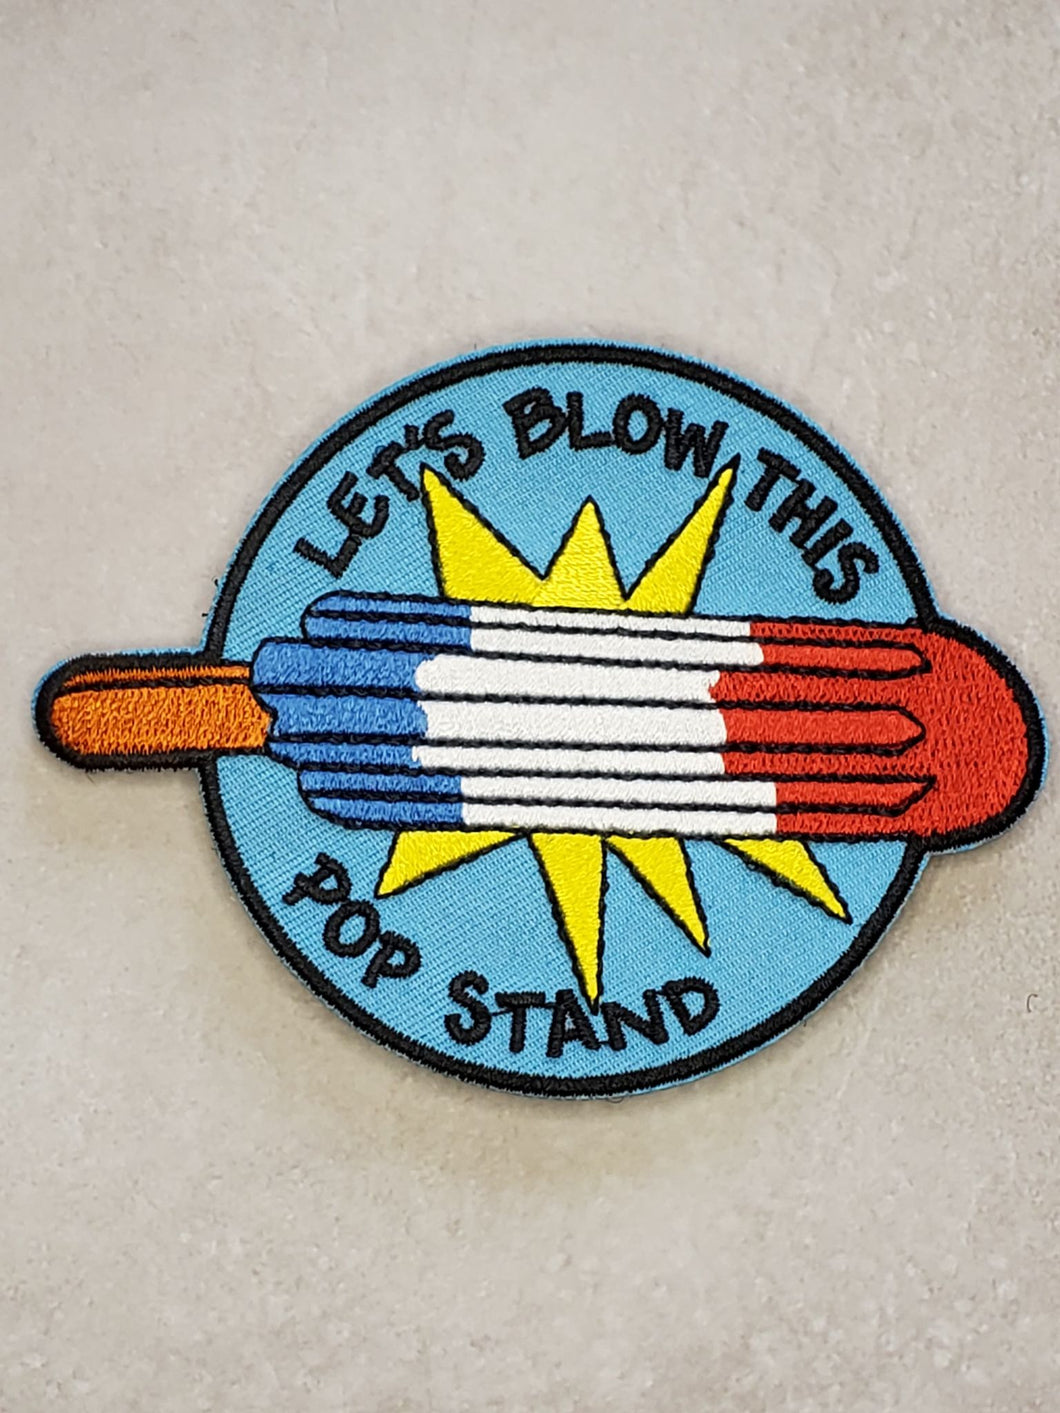 Let's Blow This Pop Stand Embroidered Morale Patch